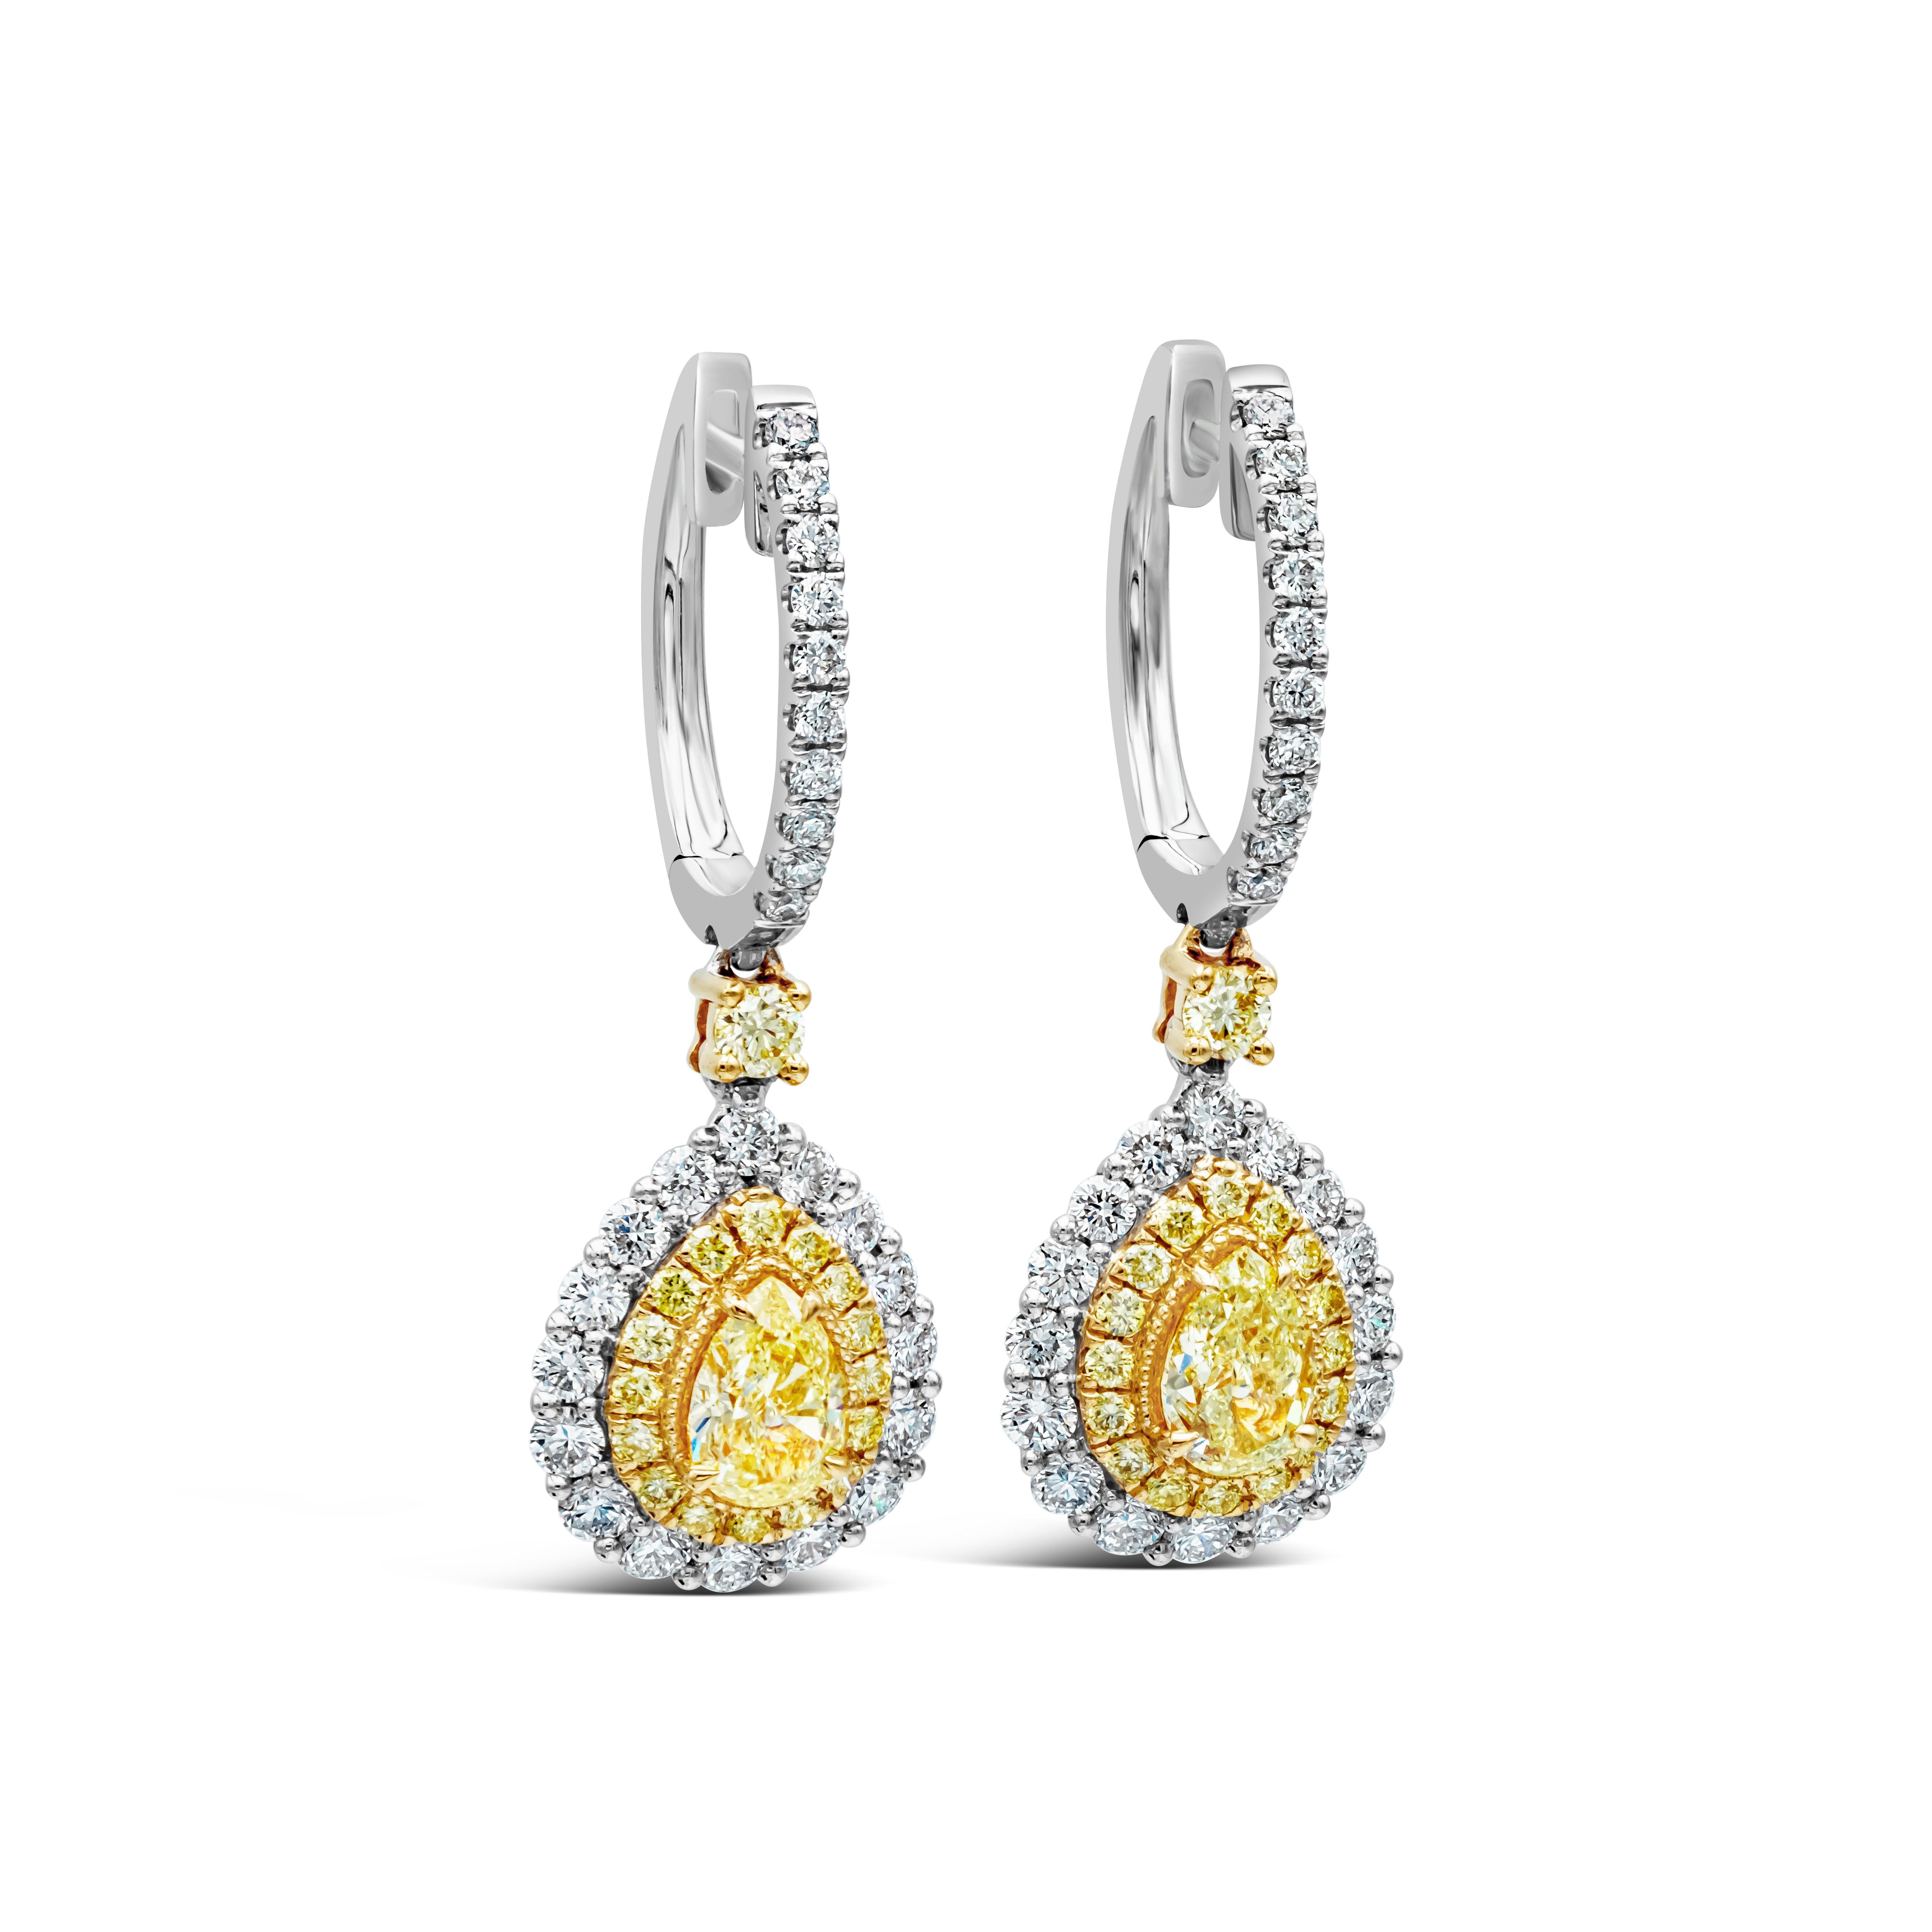 This pair of earrings showcases a pear shape yellow diamond surrounded by a double halo. The inner halo is made up of yellow round diamonds. The outer halo is made up of brilliant round diamonds. The two pear shape fancy yellow diamonds weigh 1.08